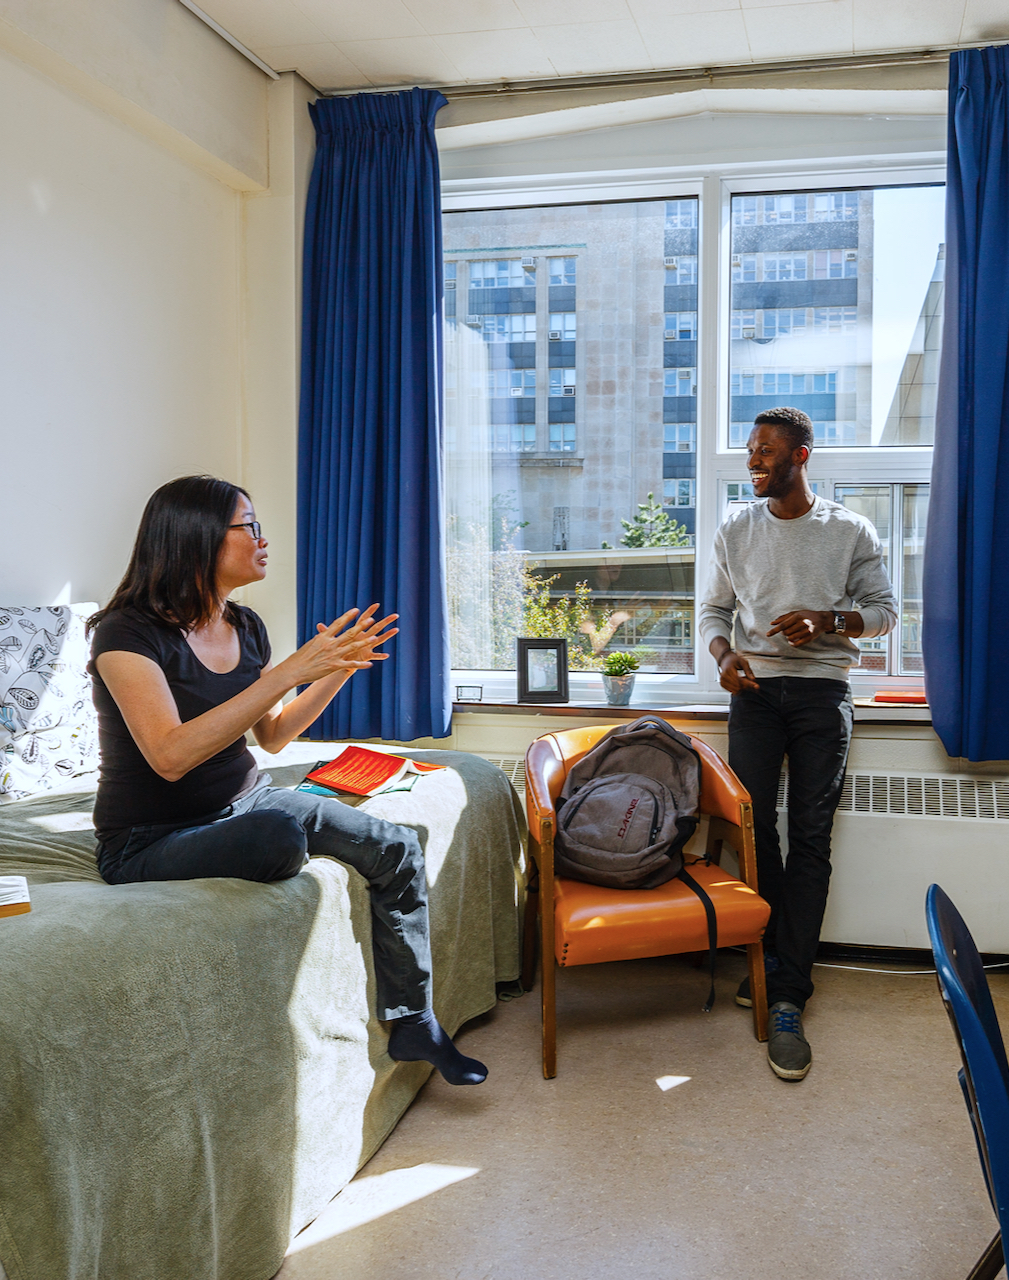 Two students in a residence room. A young Asian woman is seated on the bed, speaking with an African American student who stands leaning against a window sill.